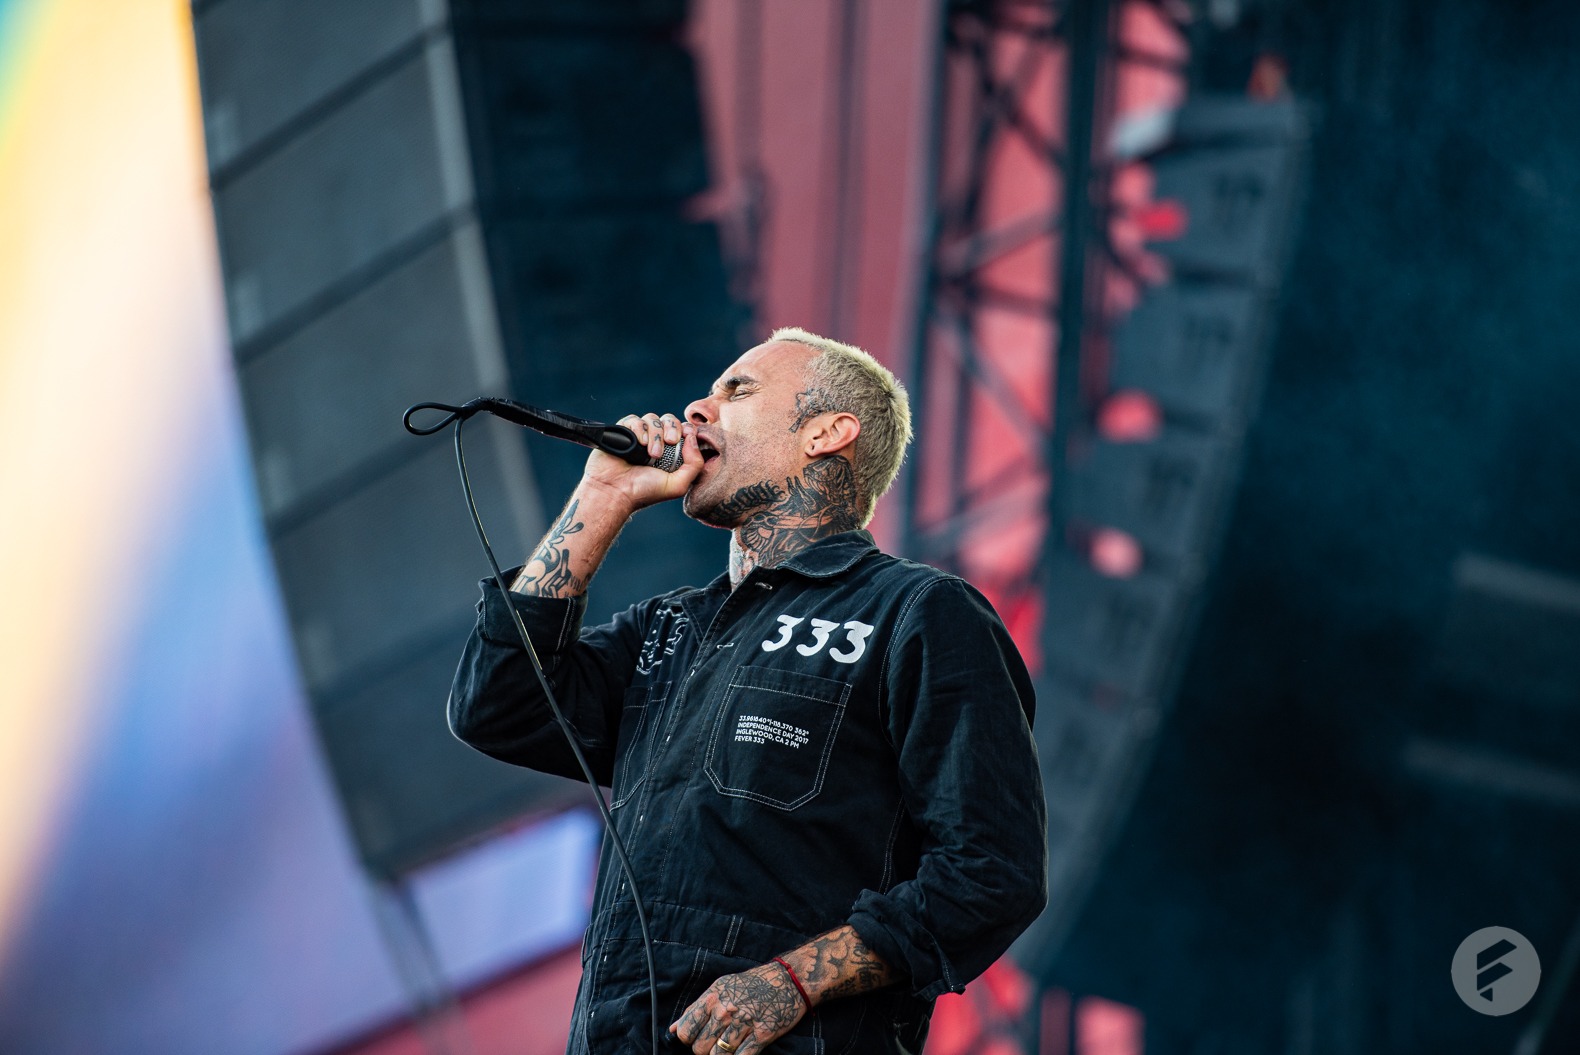 Fever 333 | Rock am Ring 2022